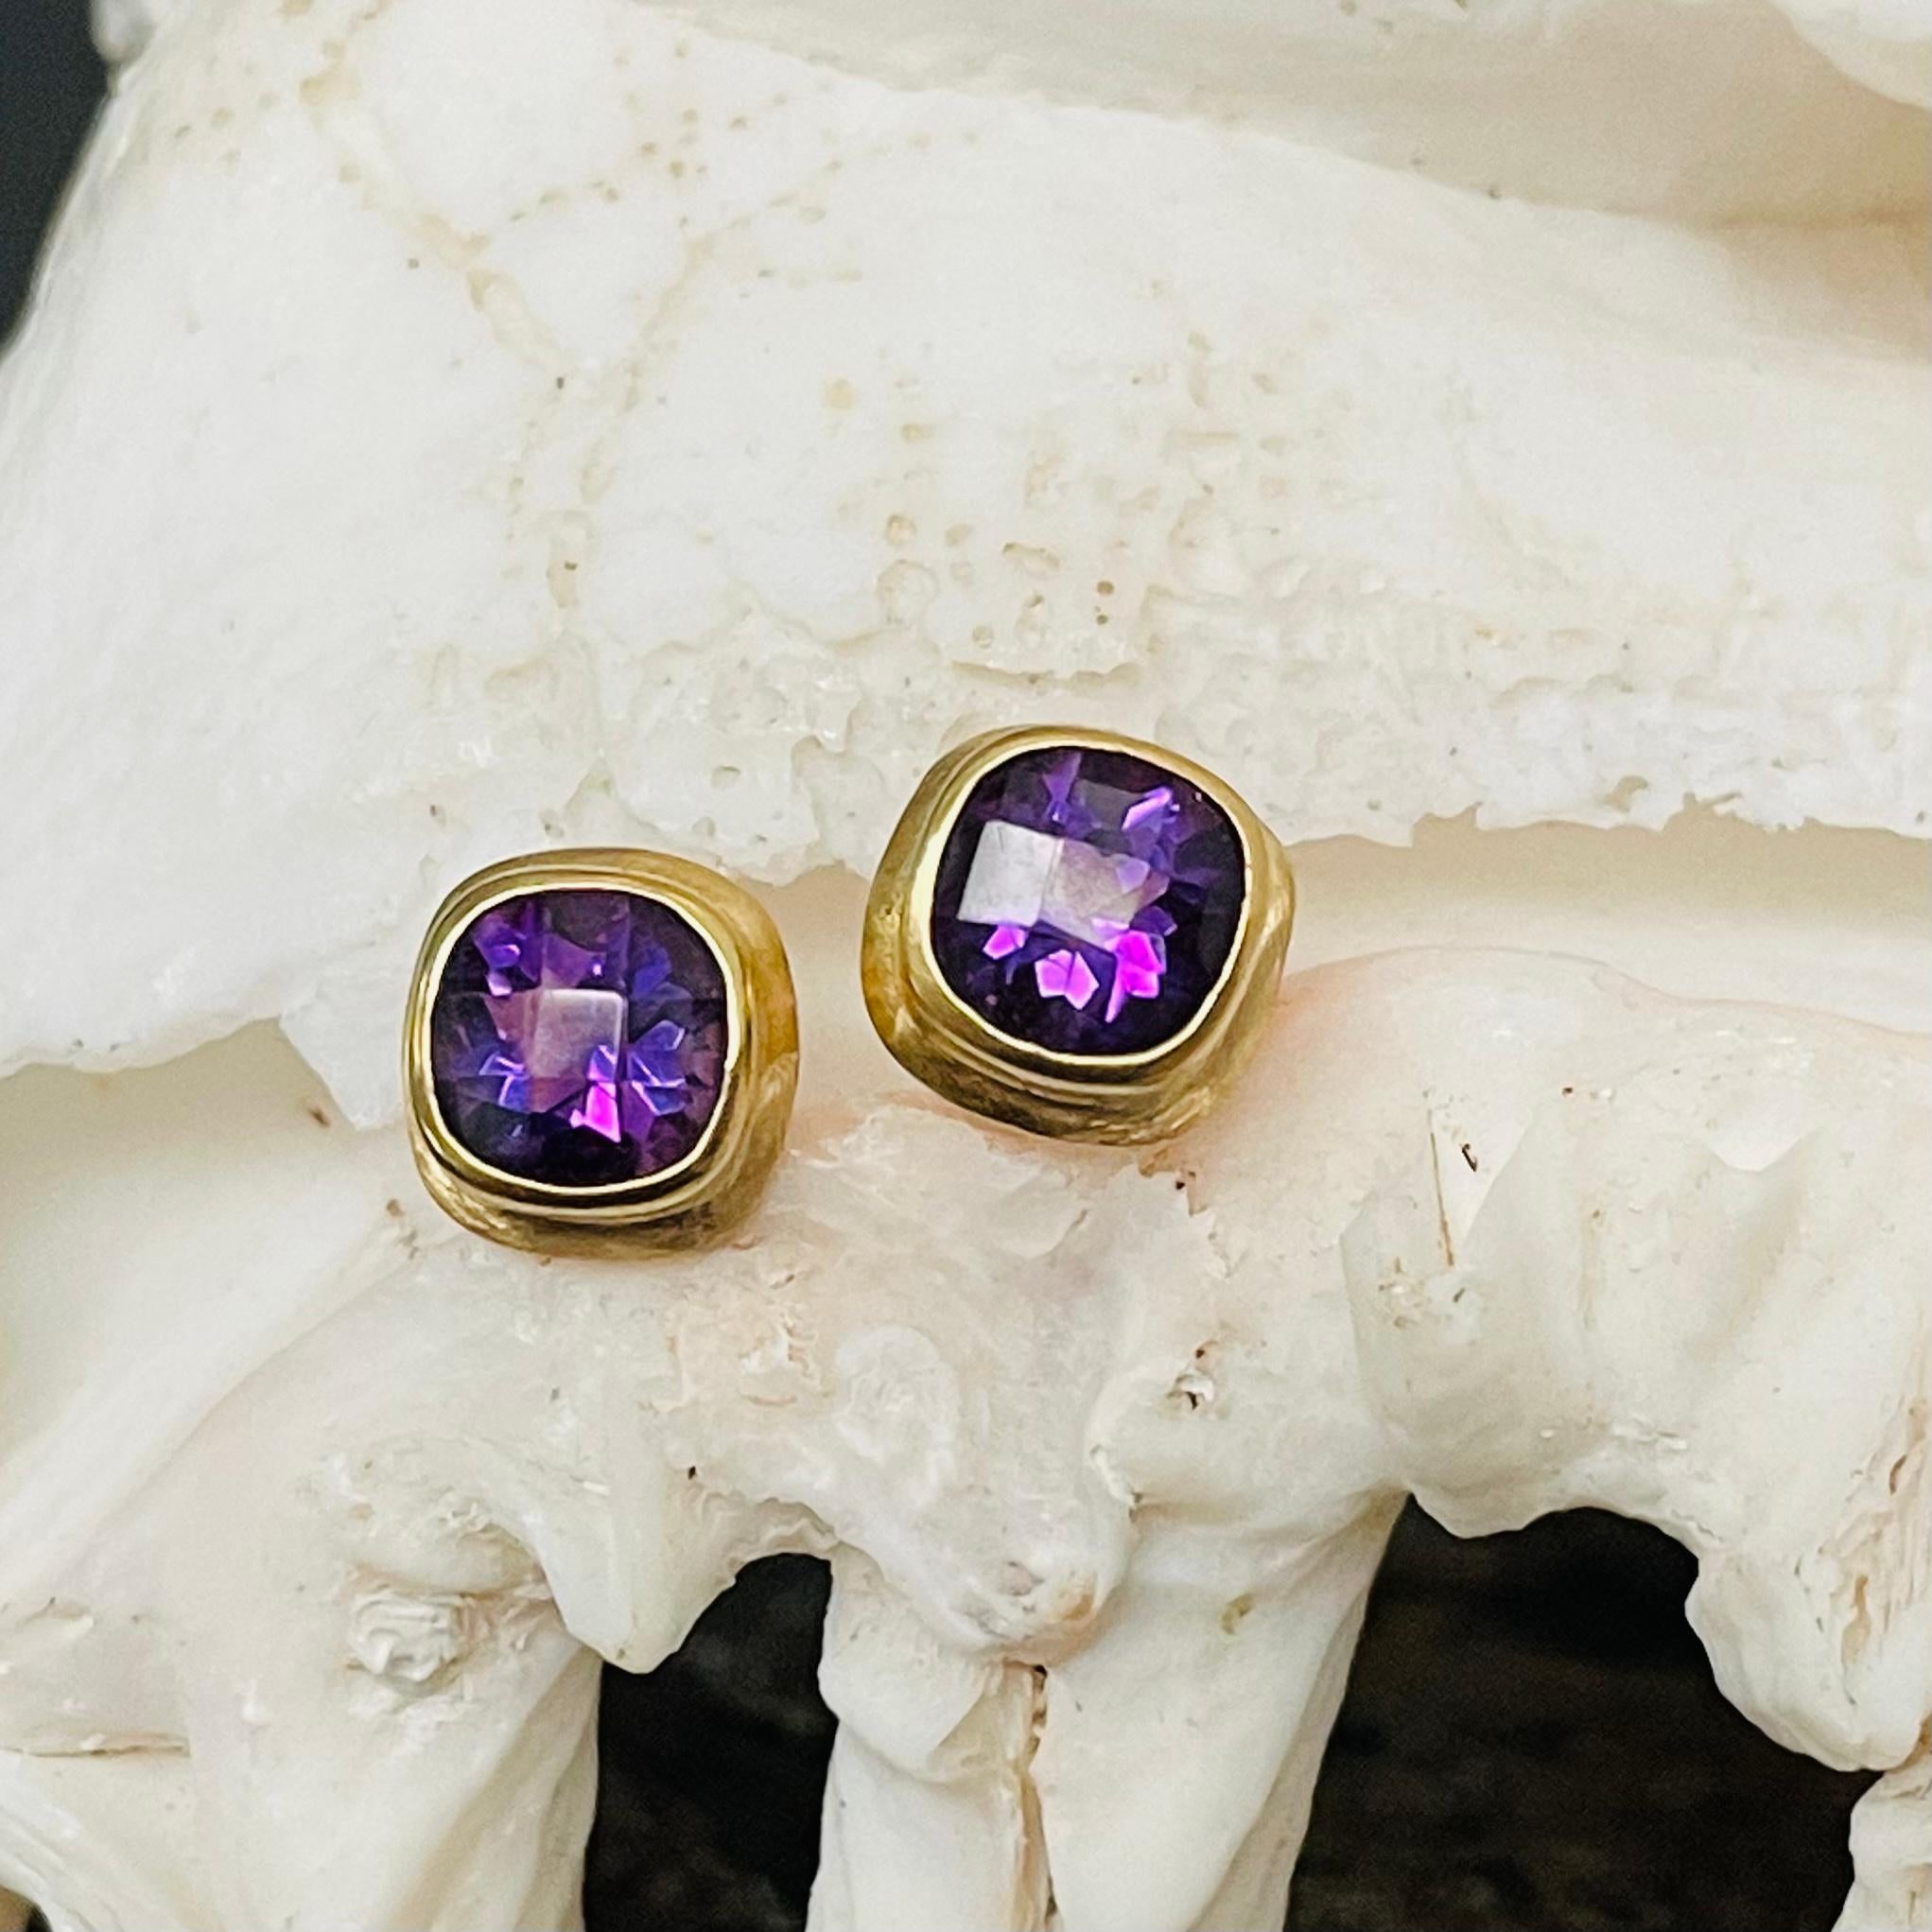 Two 5 mm cushion checkerboard faceted deep purple African amethysts are held in classic basic settings with slightly textured matte double bezels surrounding in these ultimately simple yet attractive posts.   A nice splash of color for your day!